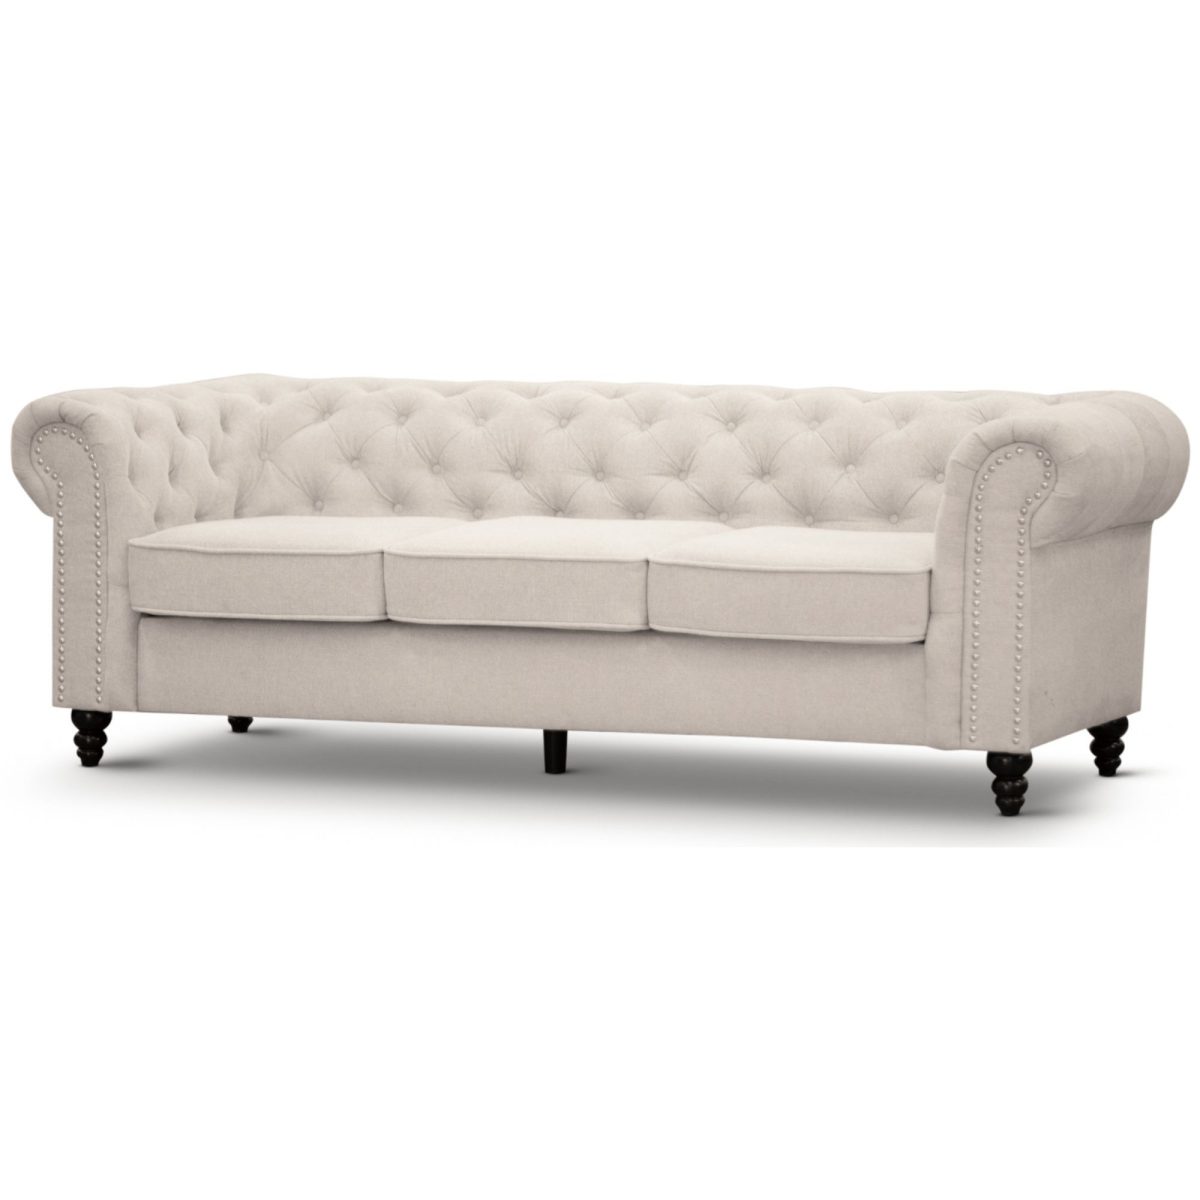 Mellowly Sofa Fabric Uplholstered Chesterfield Lounge Couch – Beige, 3 Seater